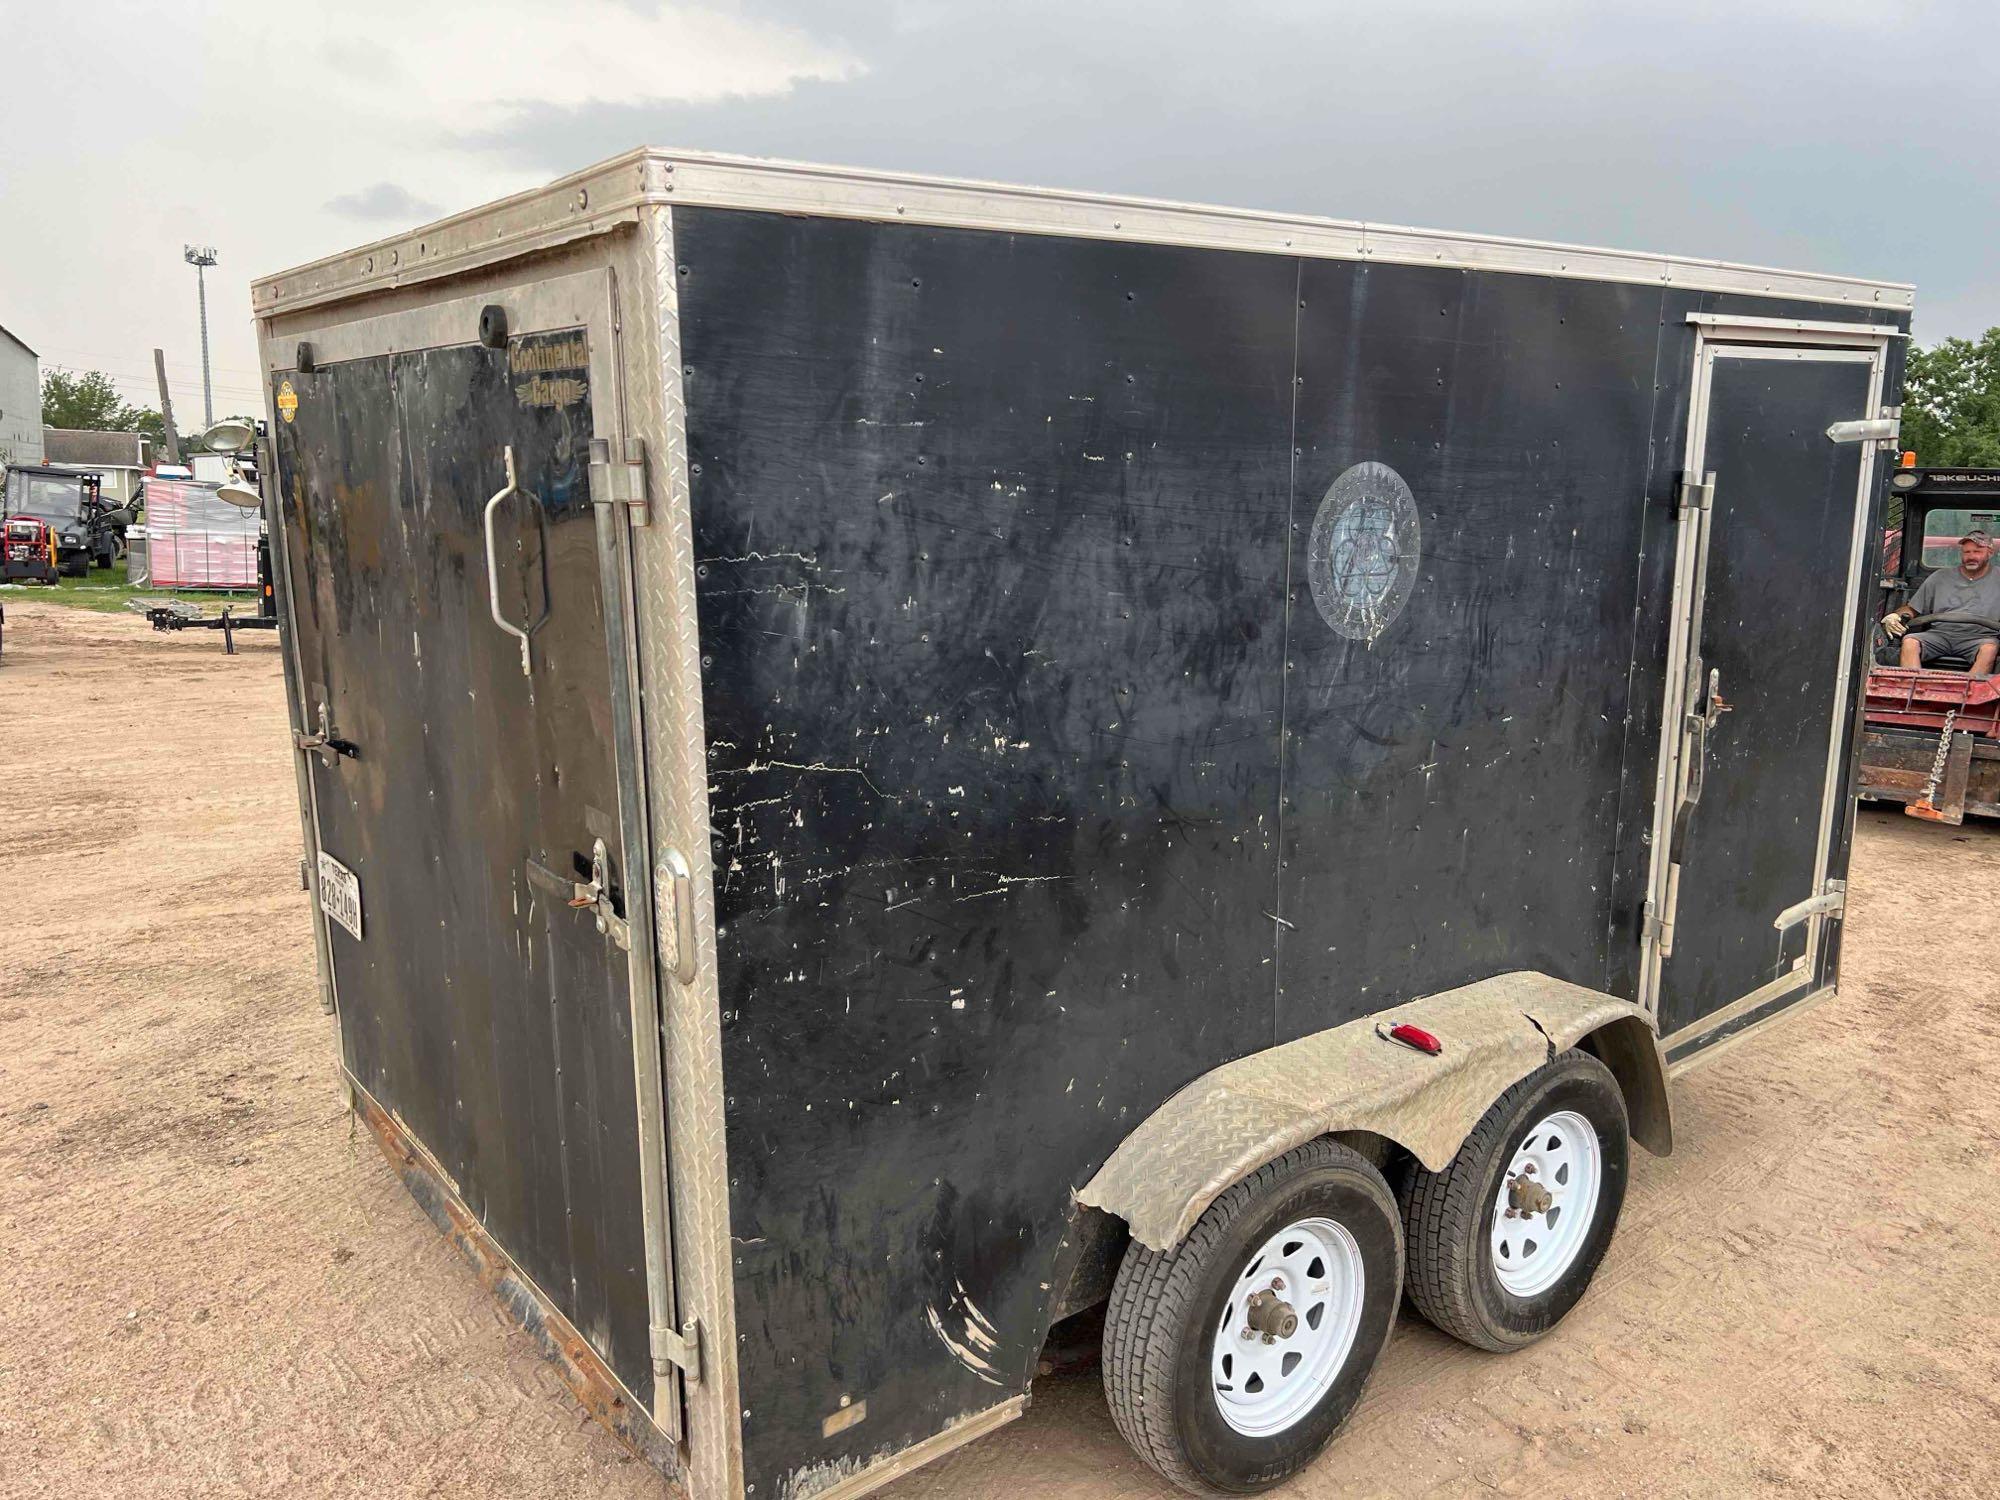 2017 FOREST RIVER TXVHW712TA CARGO TRAILER VN:Y027967 equipped with 7ft. X 12ft. Enclosed body, rear